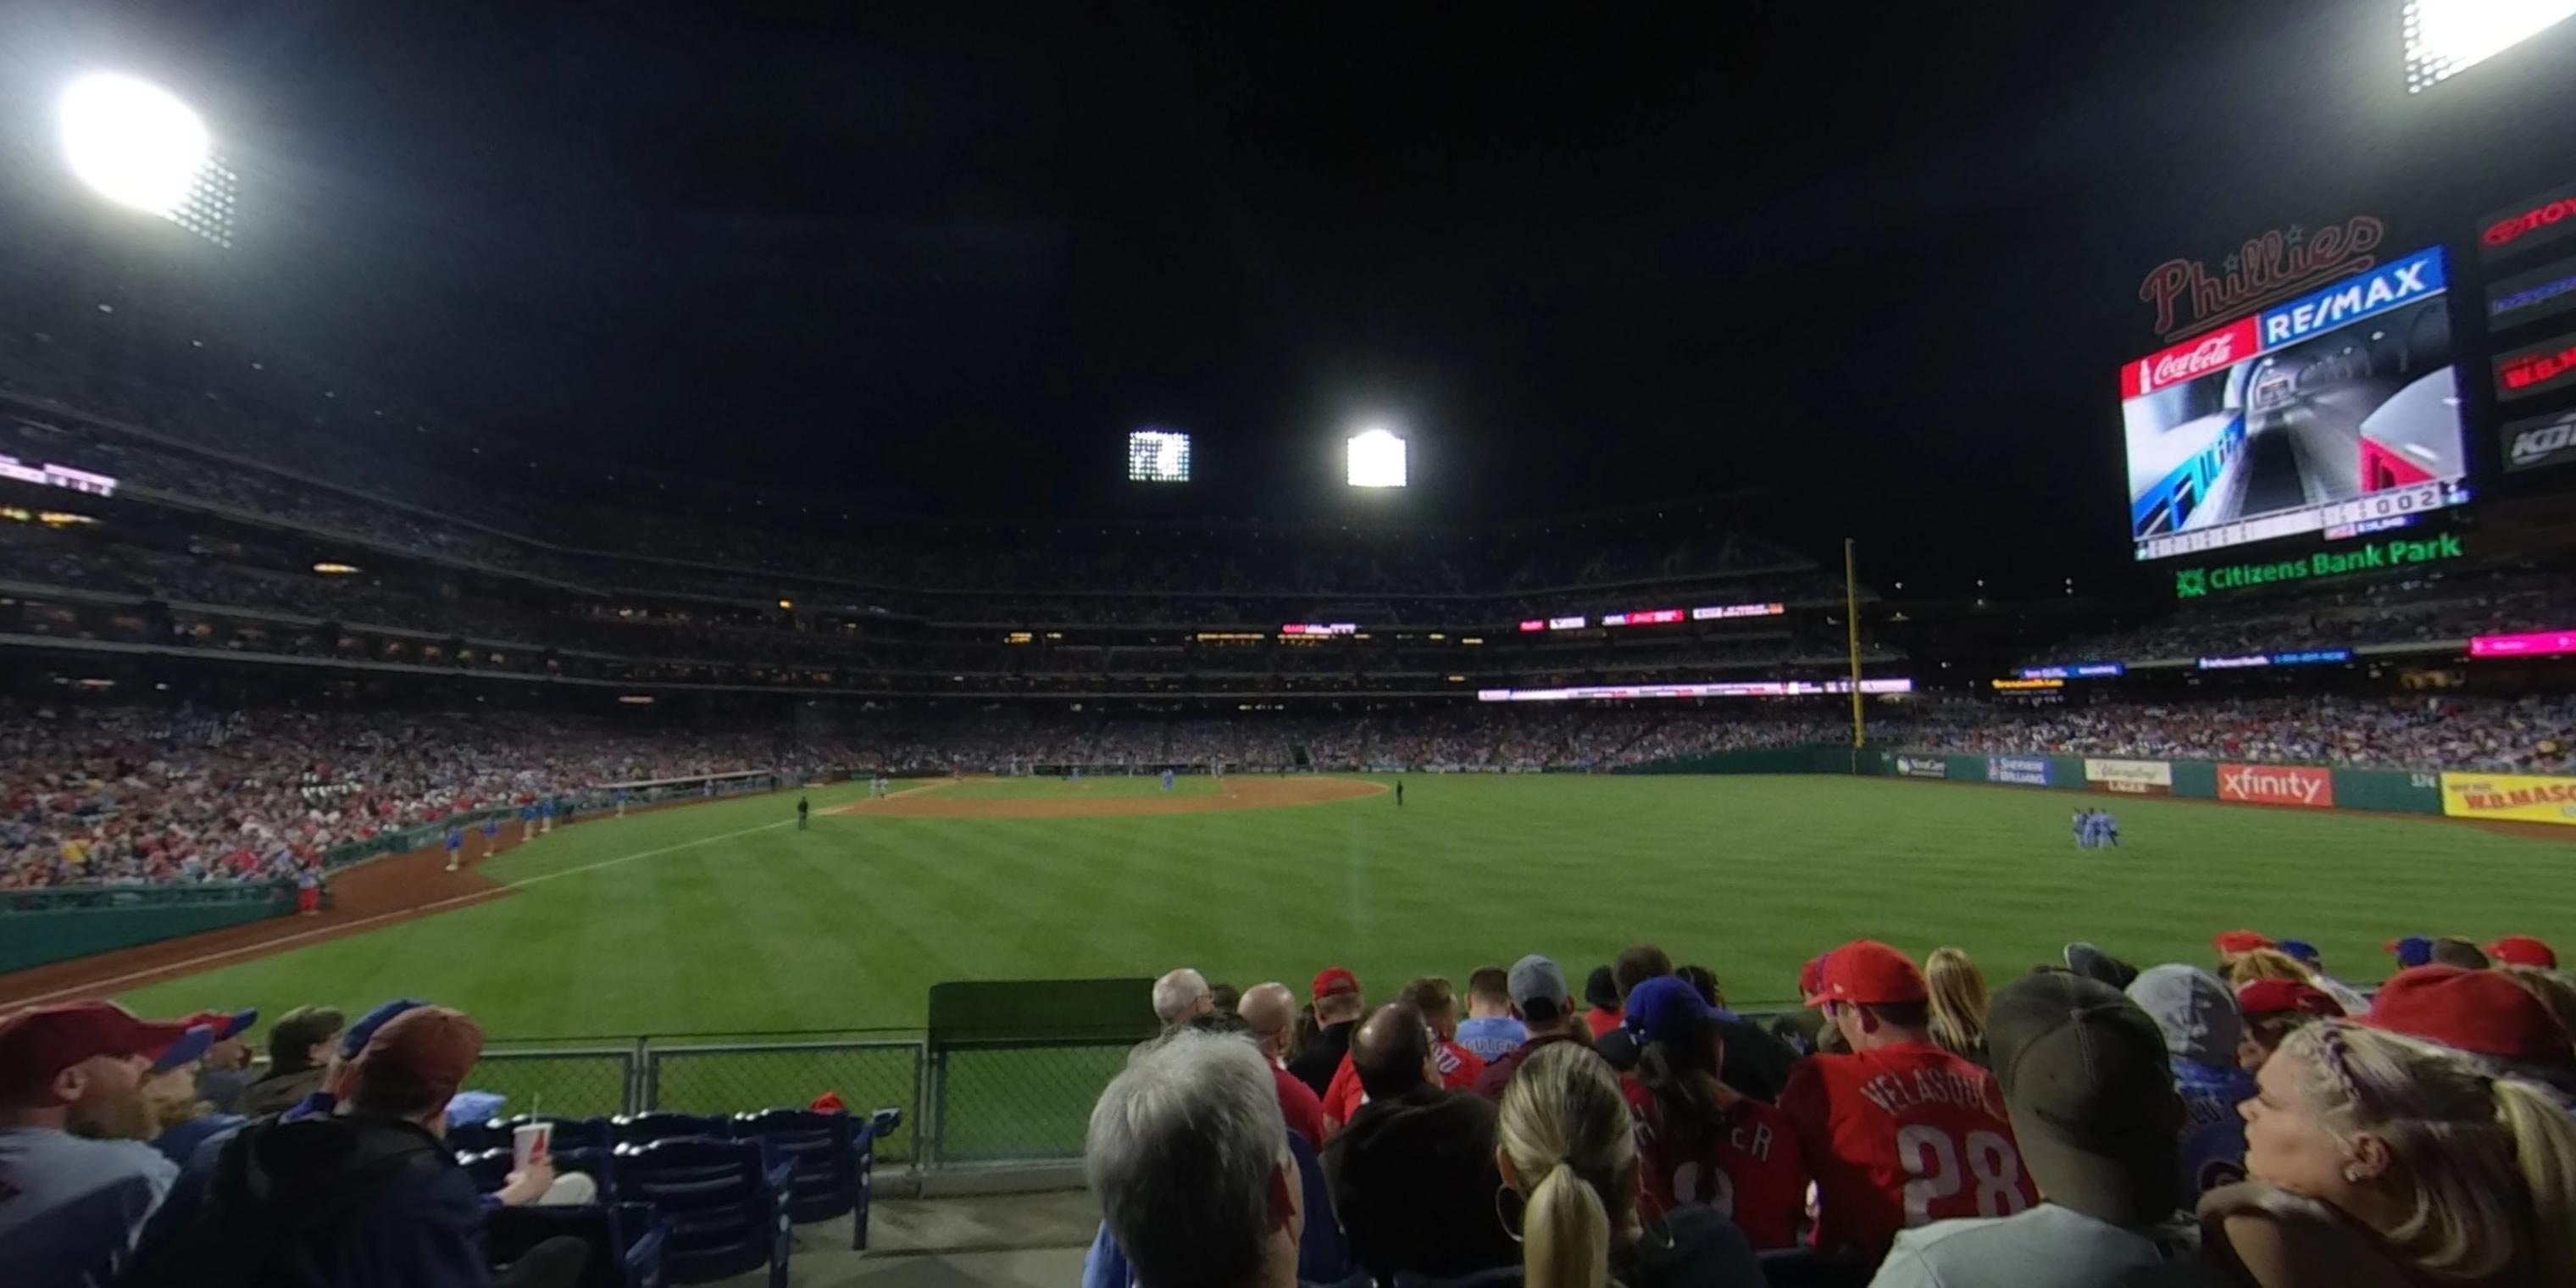 section 104 panoramic seat view  for baseball - citizens bank park